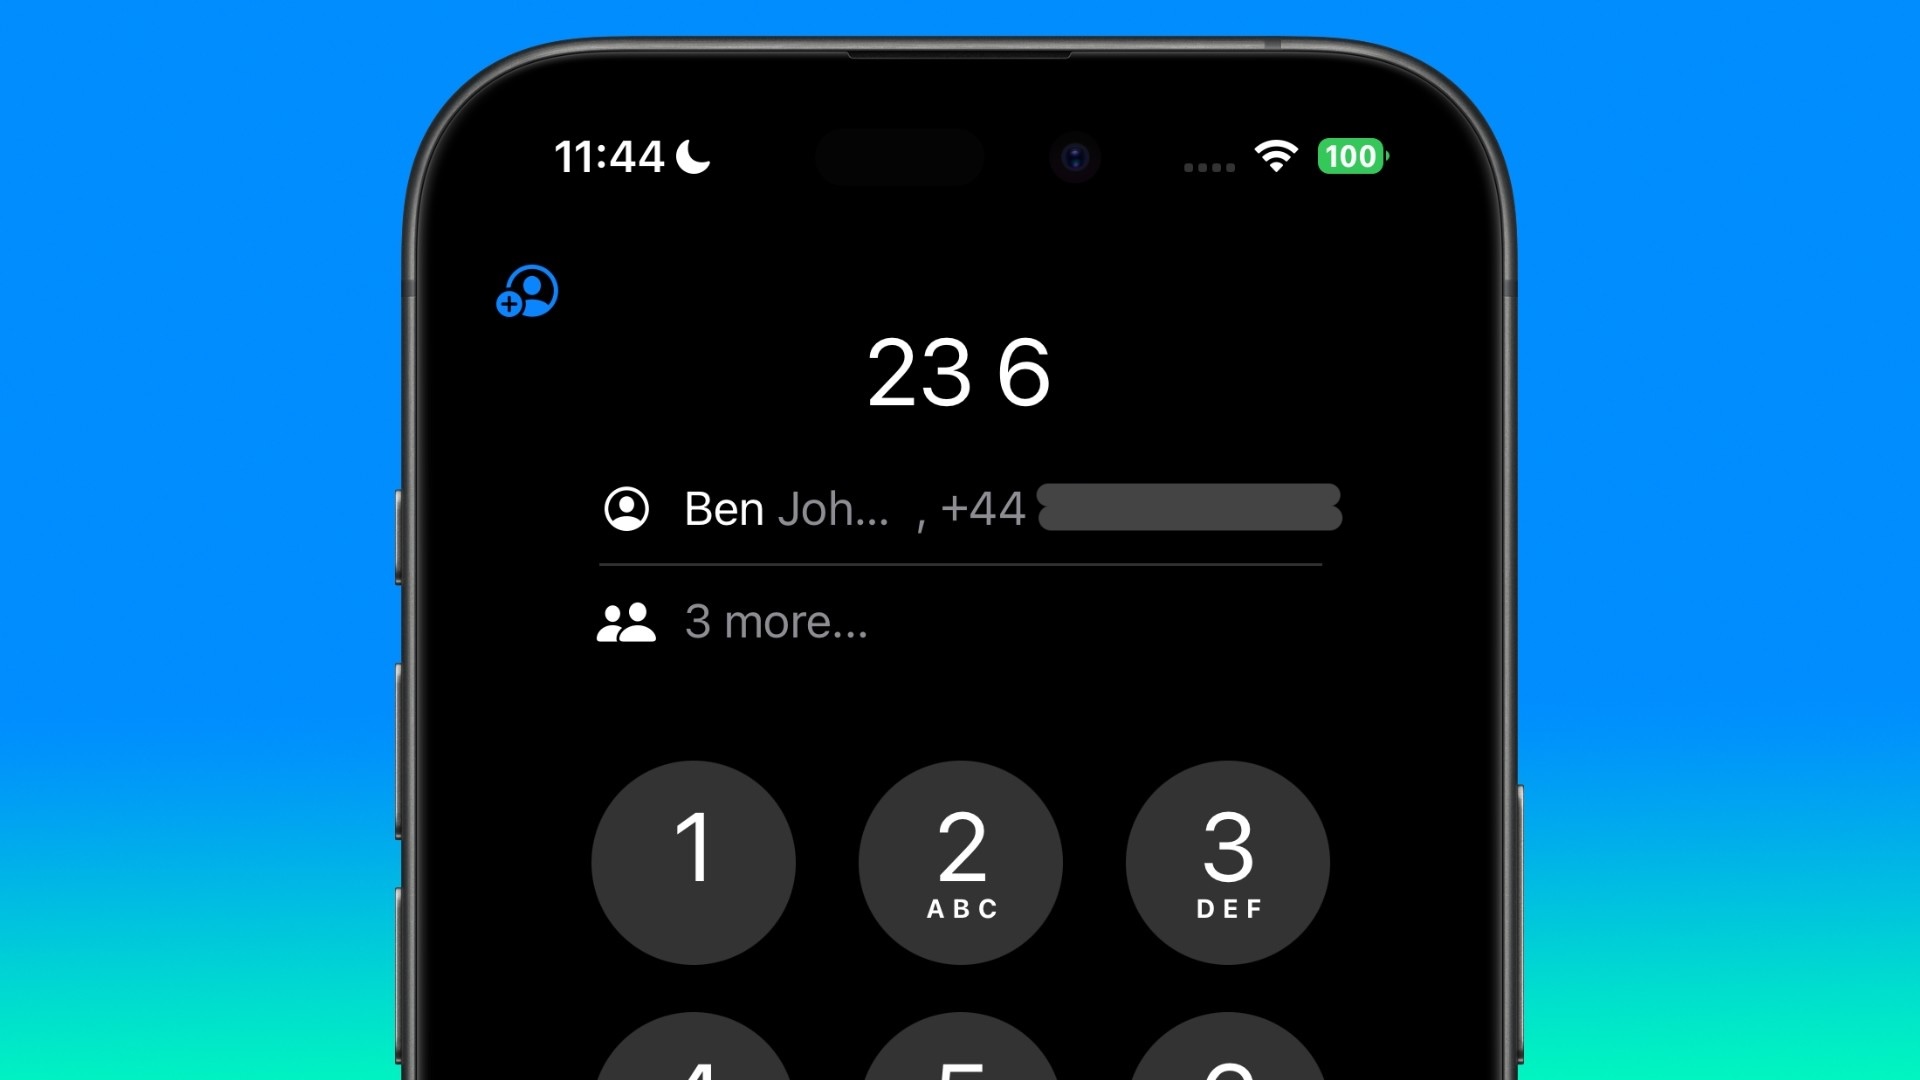 Apple’s Phone App Finally Supports T9 Dialing in iOS 18